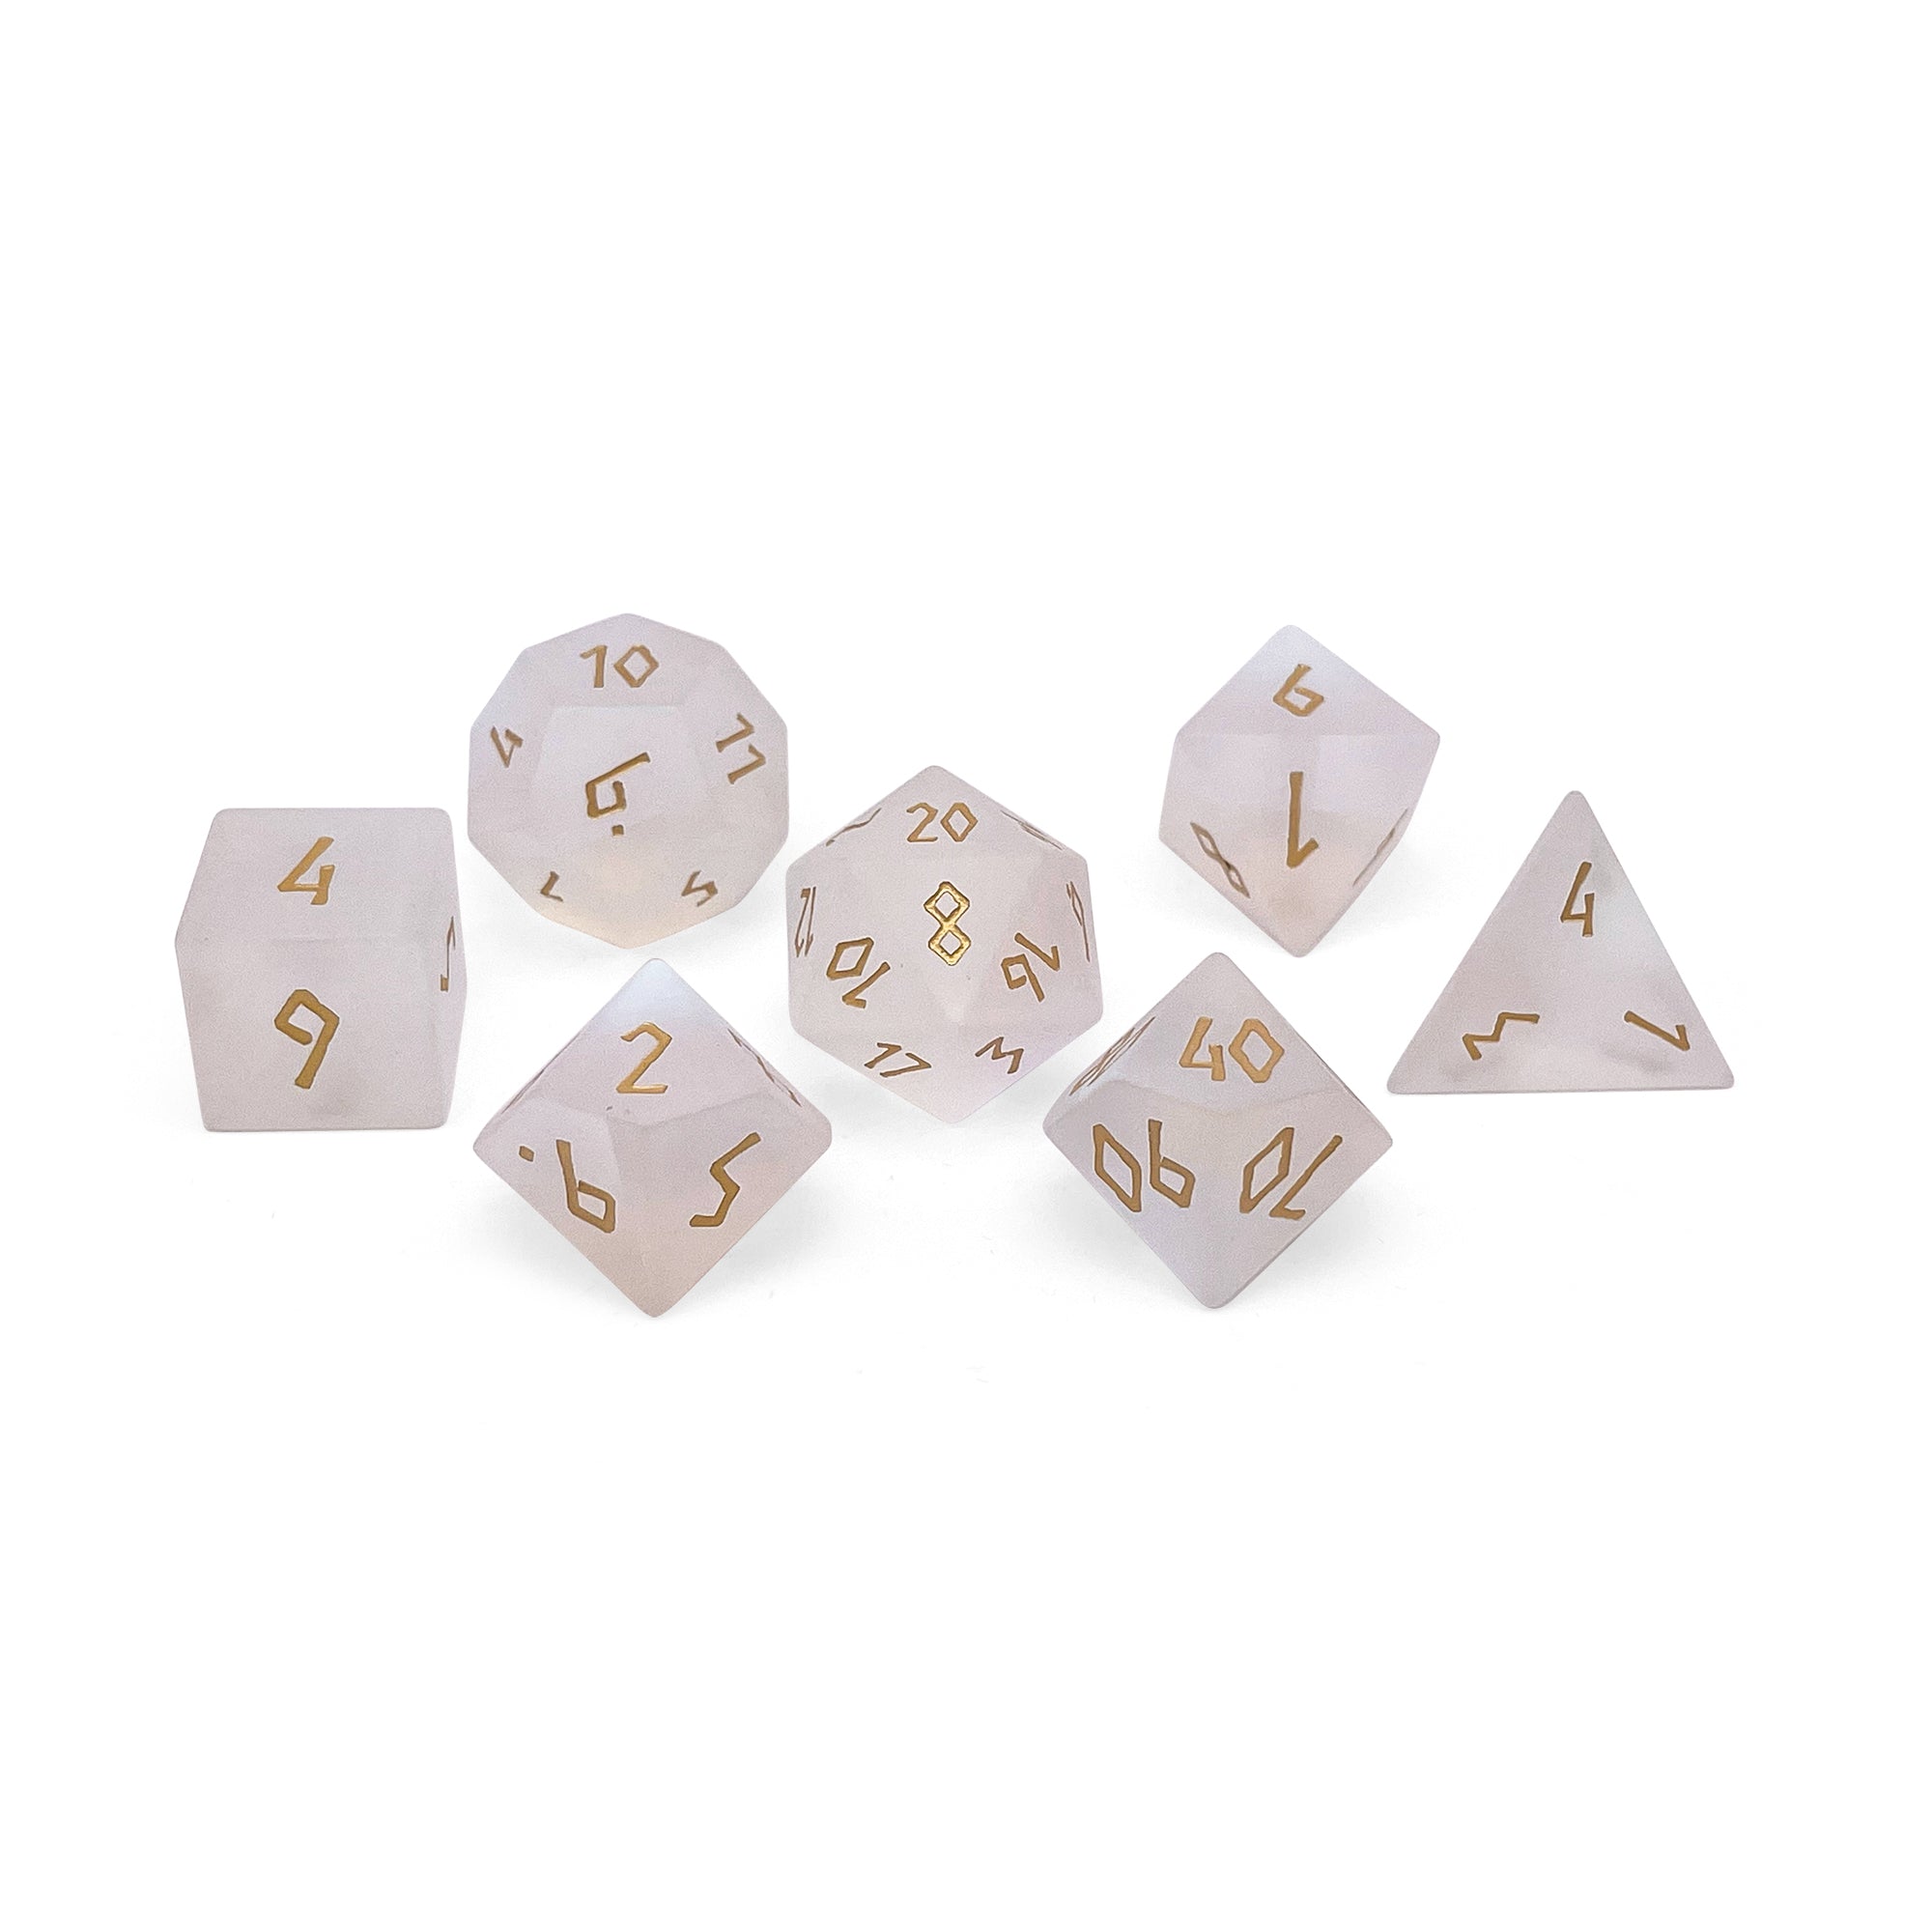 Frosted K9 Rainbow Glass - Gold Font 7 Piece RPG Set K9 Glass Dice - NOR 01525